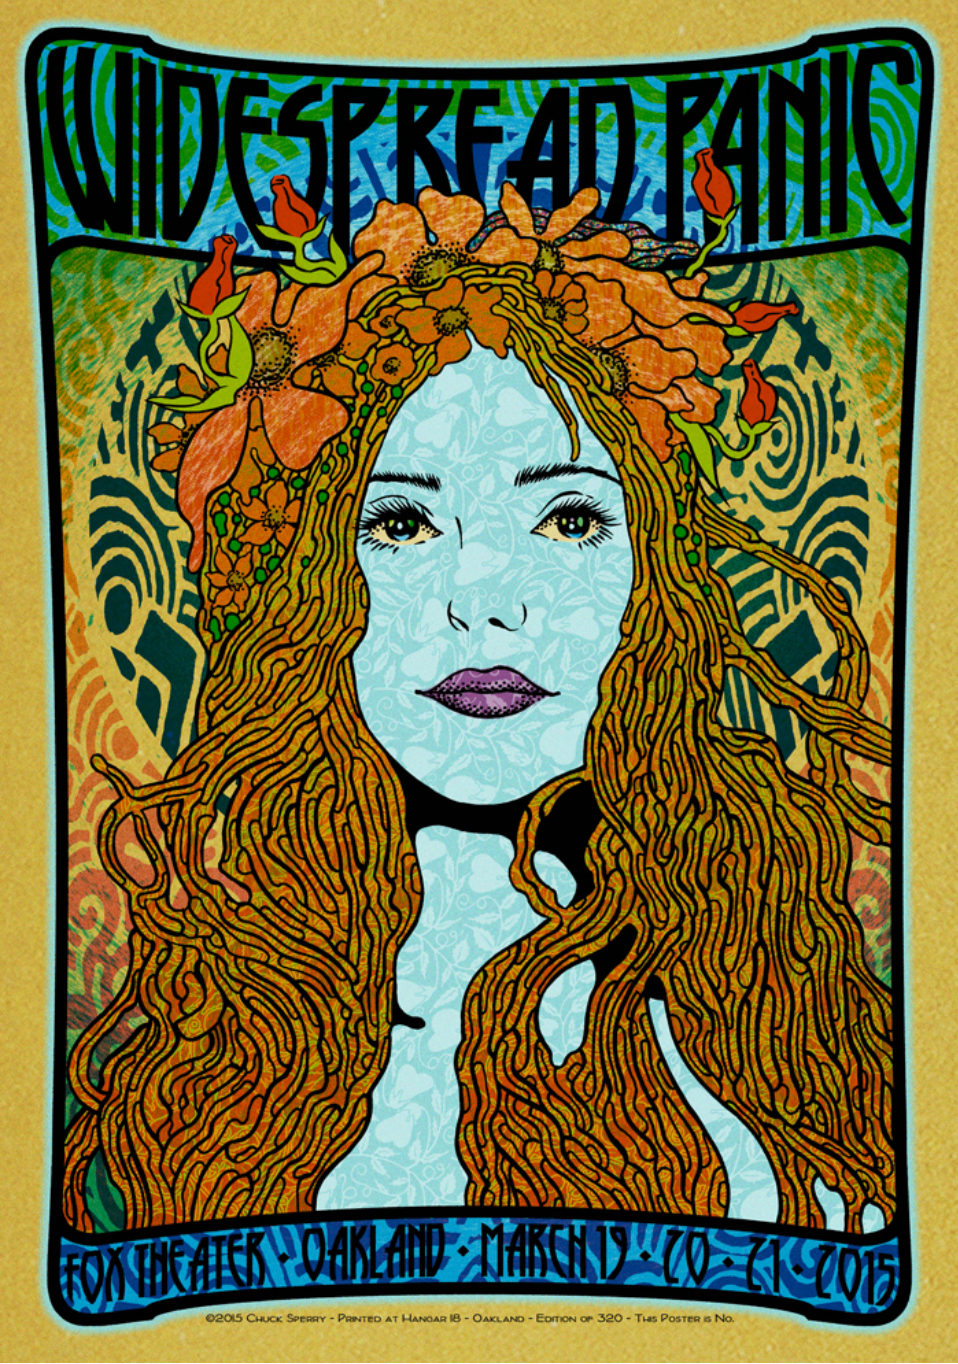  by Chuck Sperry titled Chuck Sperry - "Widespread Panic - Graces (Thalia)"